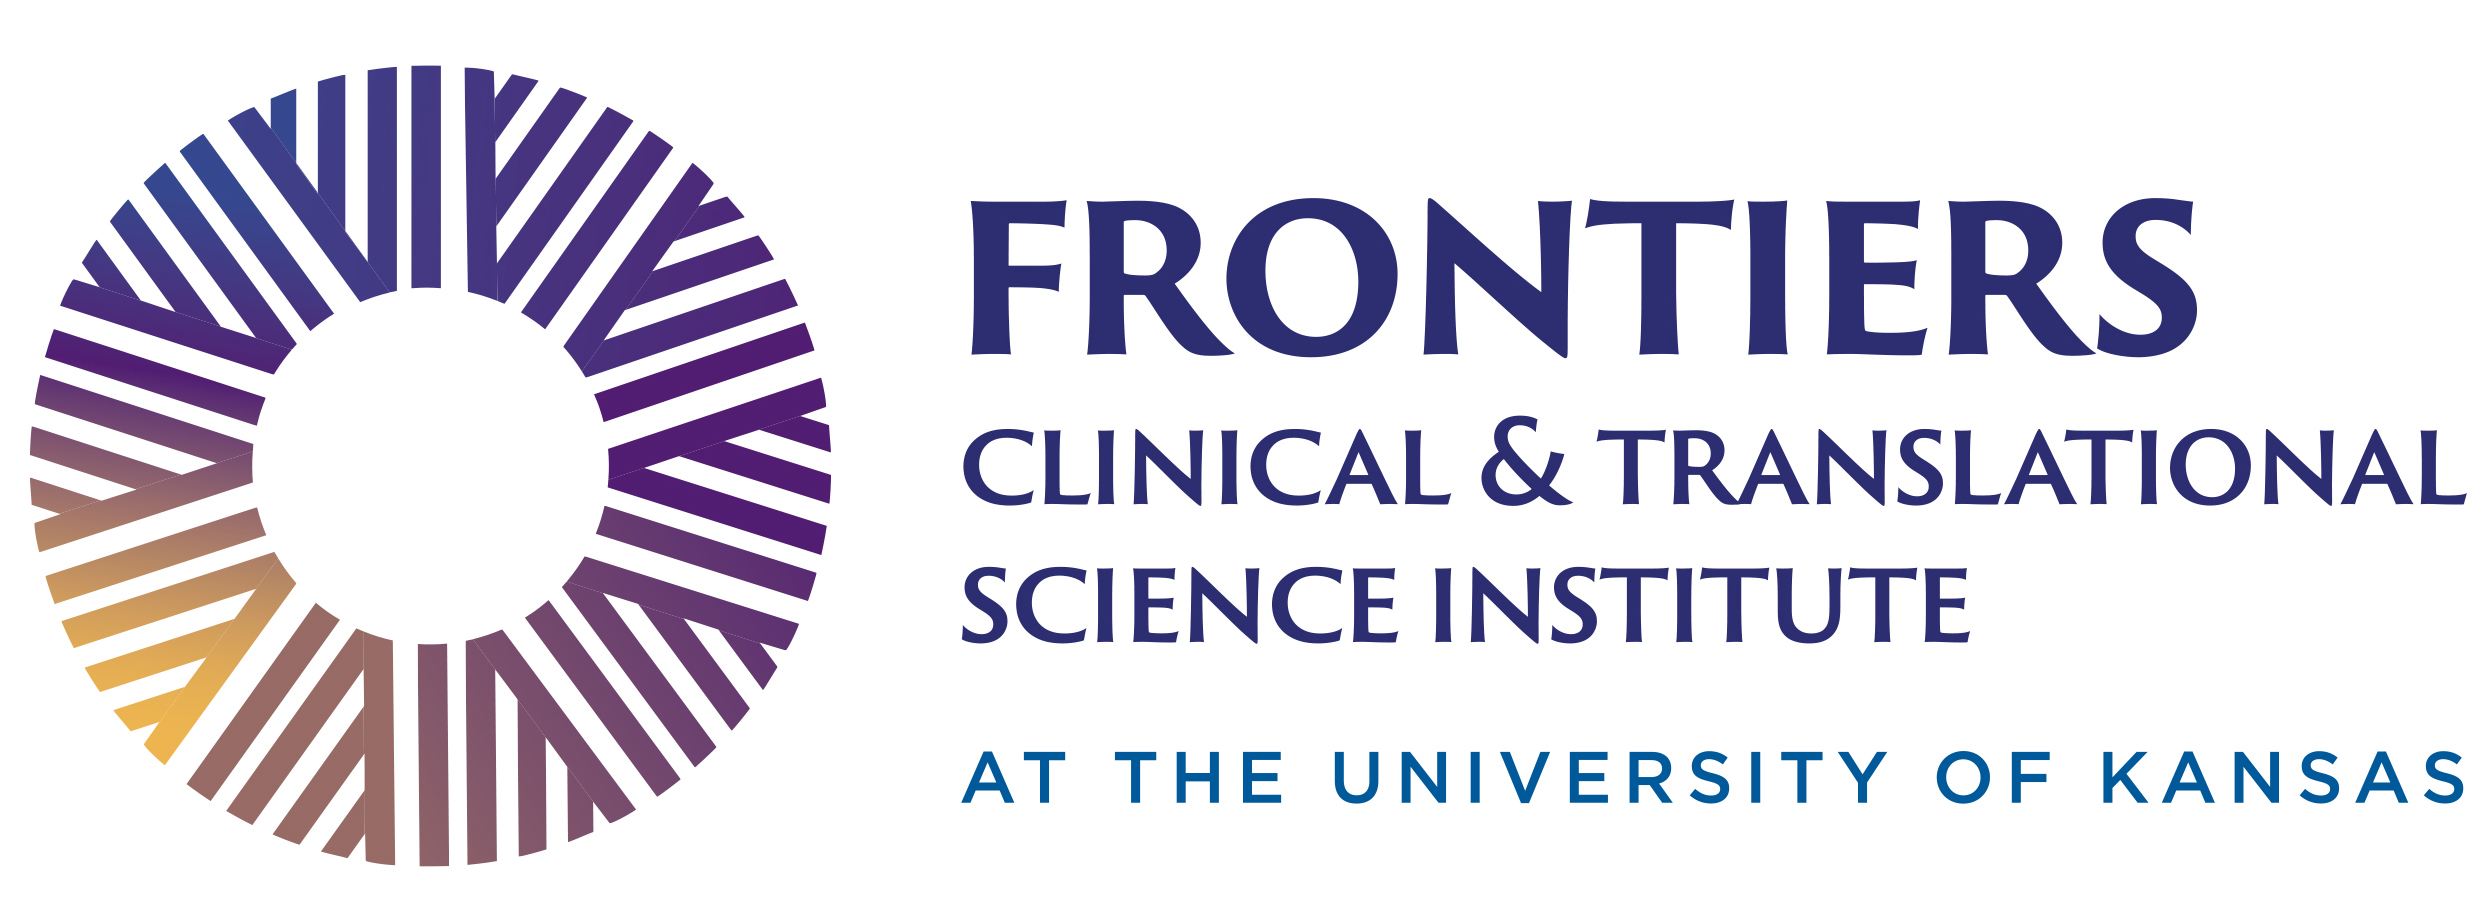 Frontiers: University of Kansas Clinical and Translational Science Institute